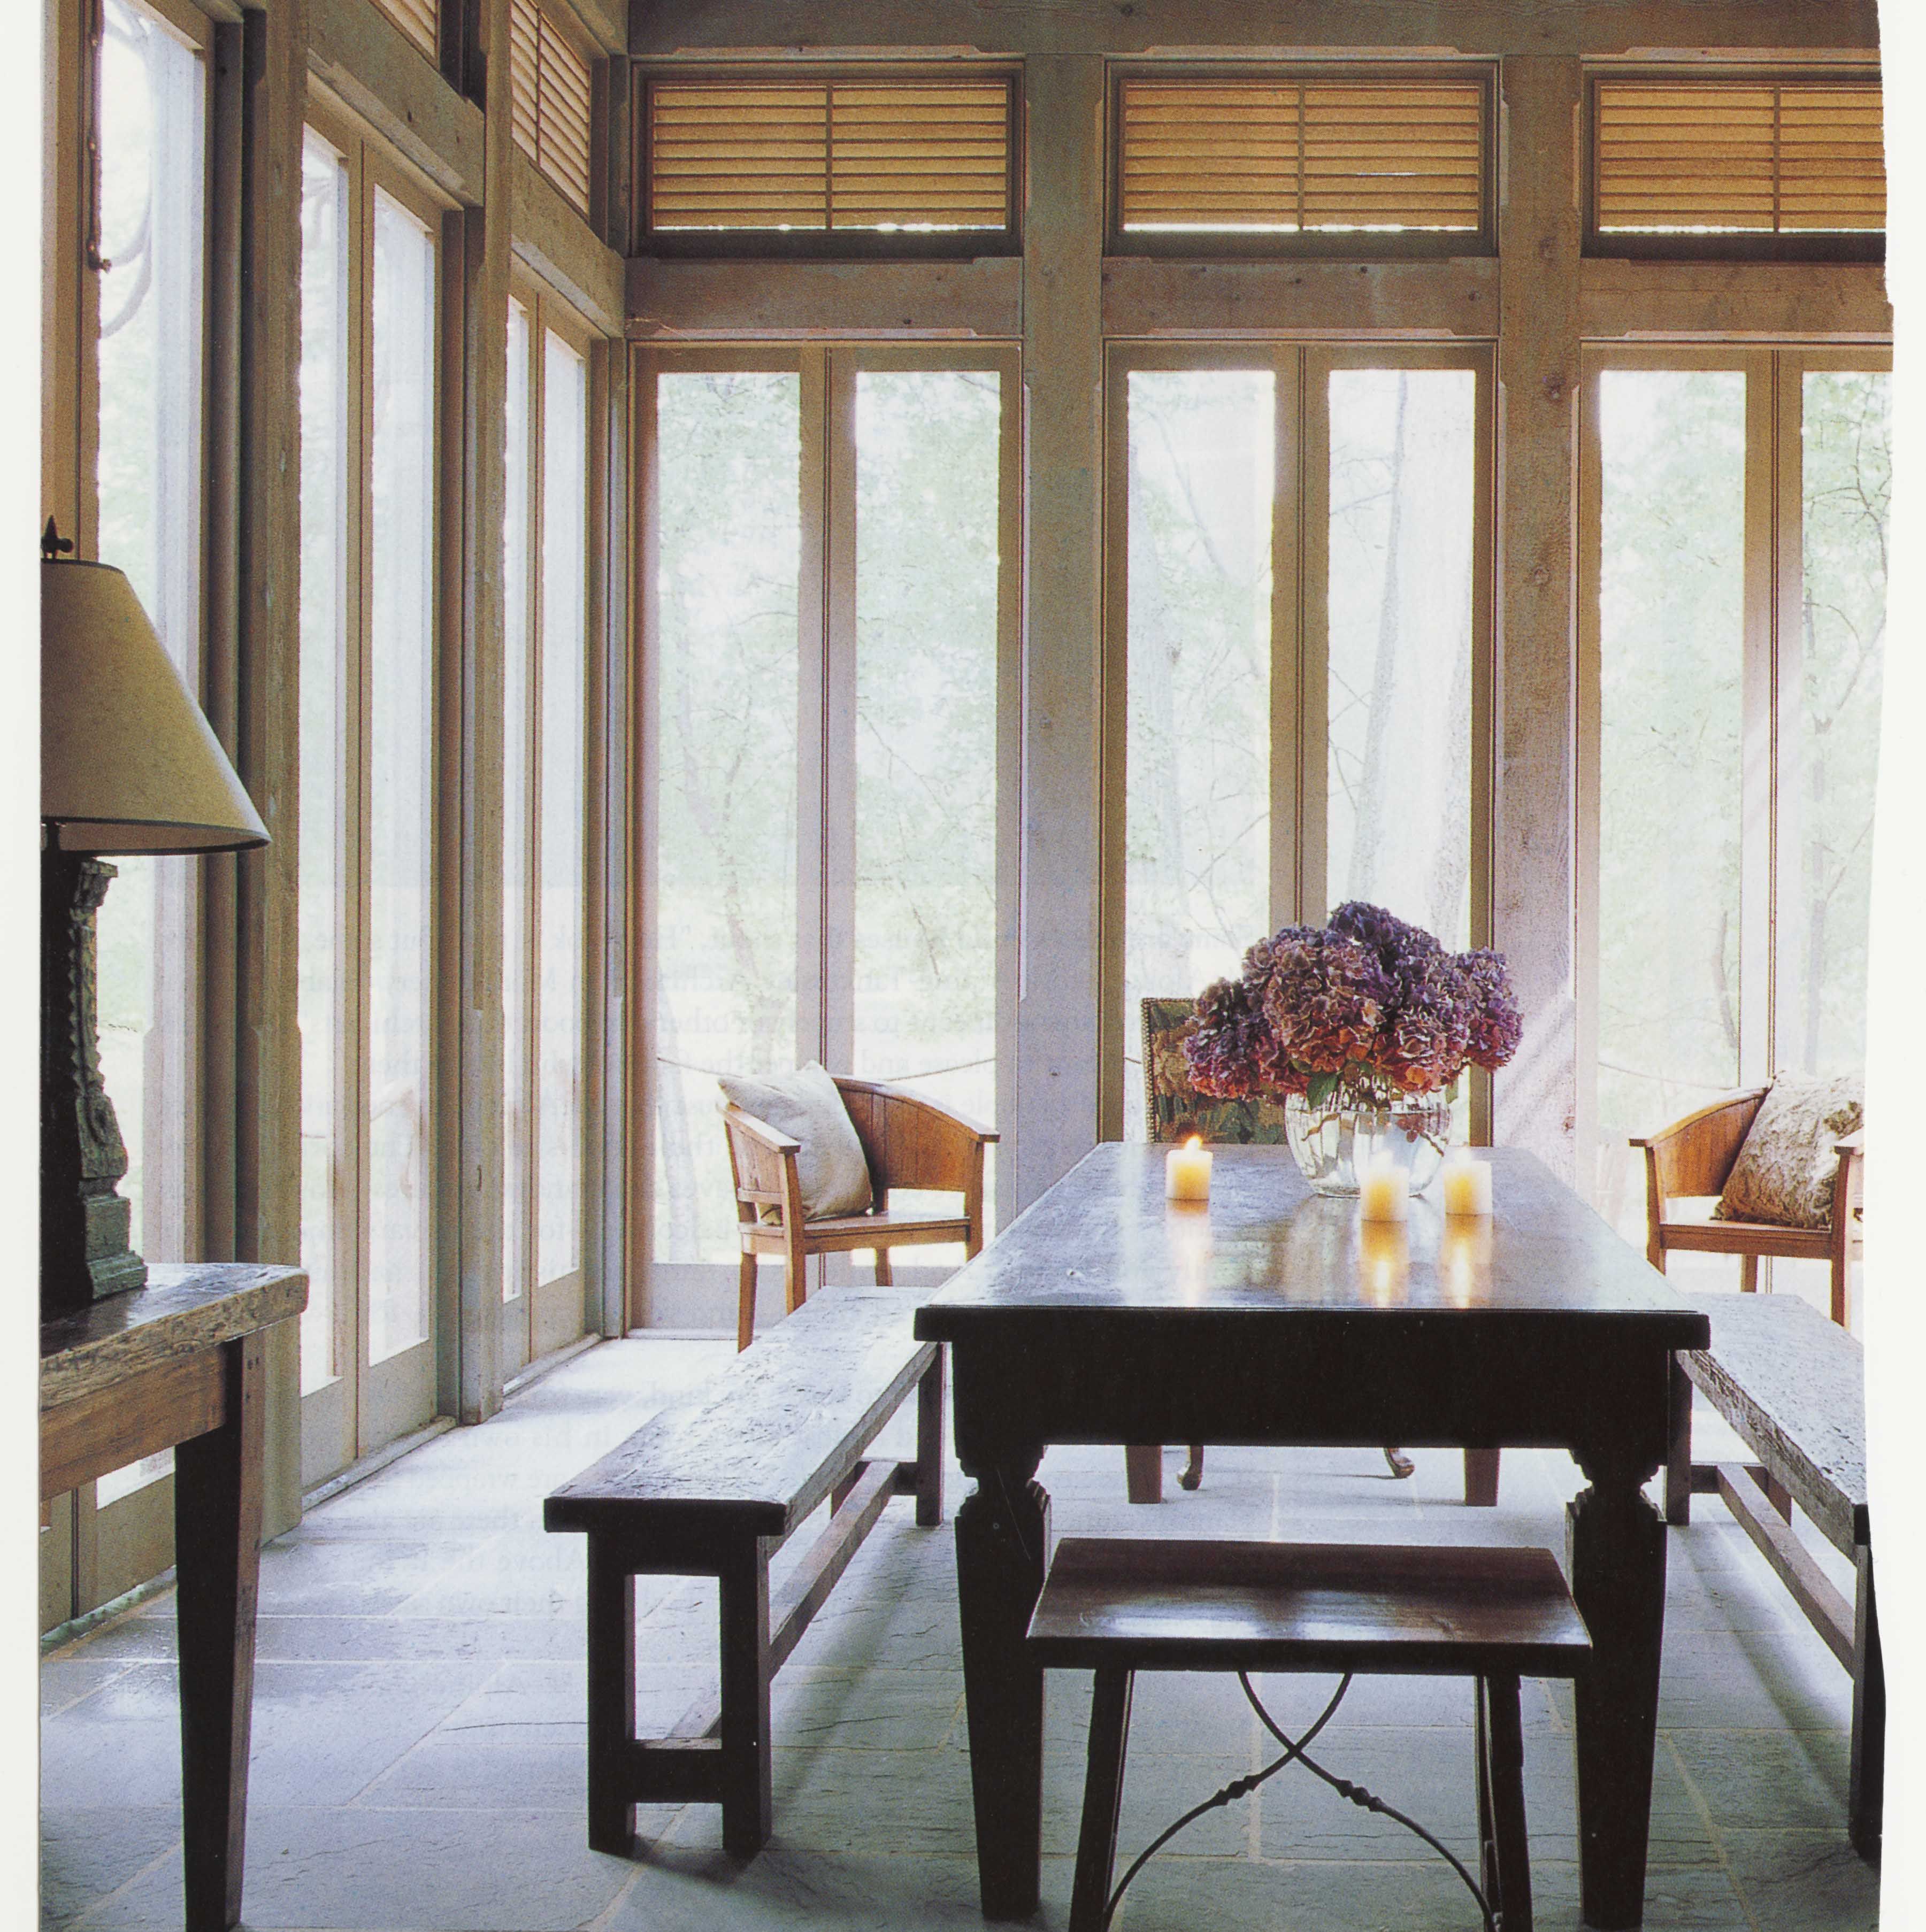 This Screened-In Porch From 1999 Has the Coziest Seating for Big Groups